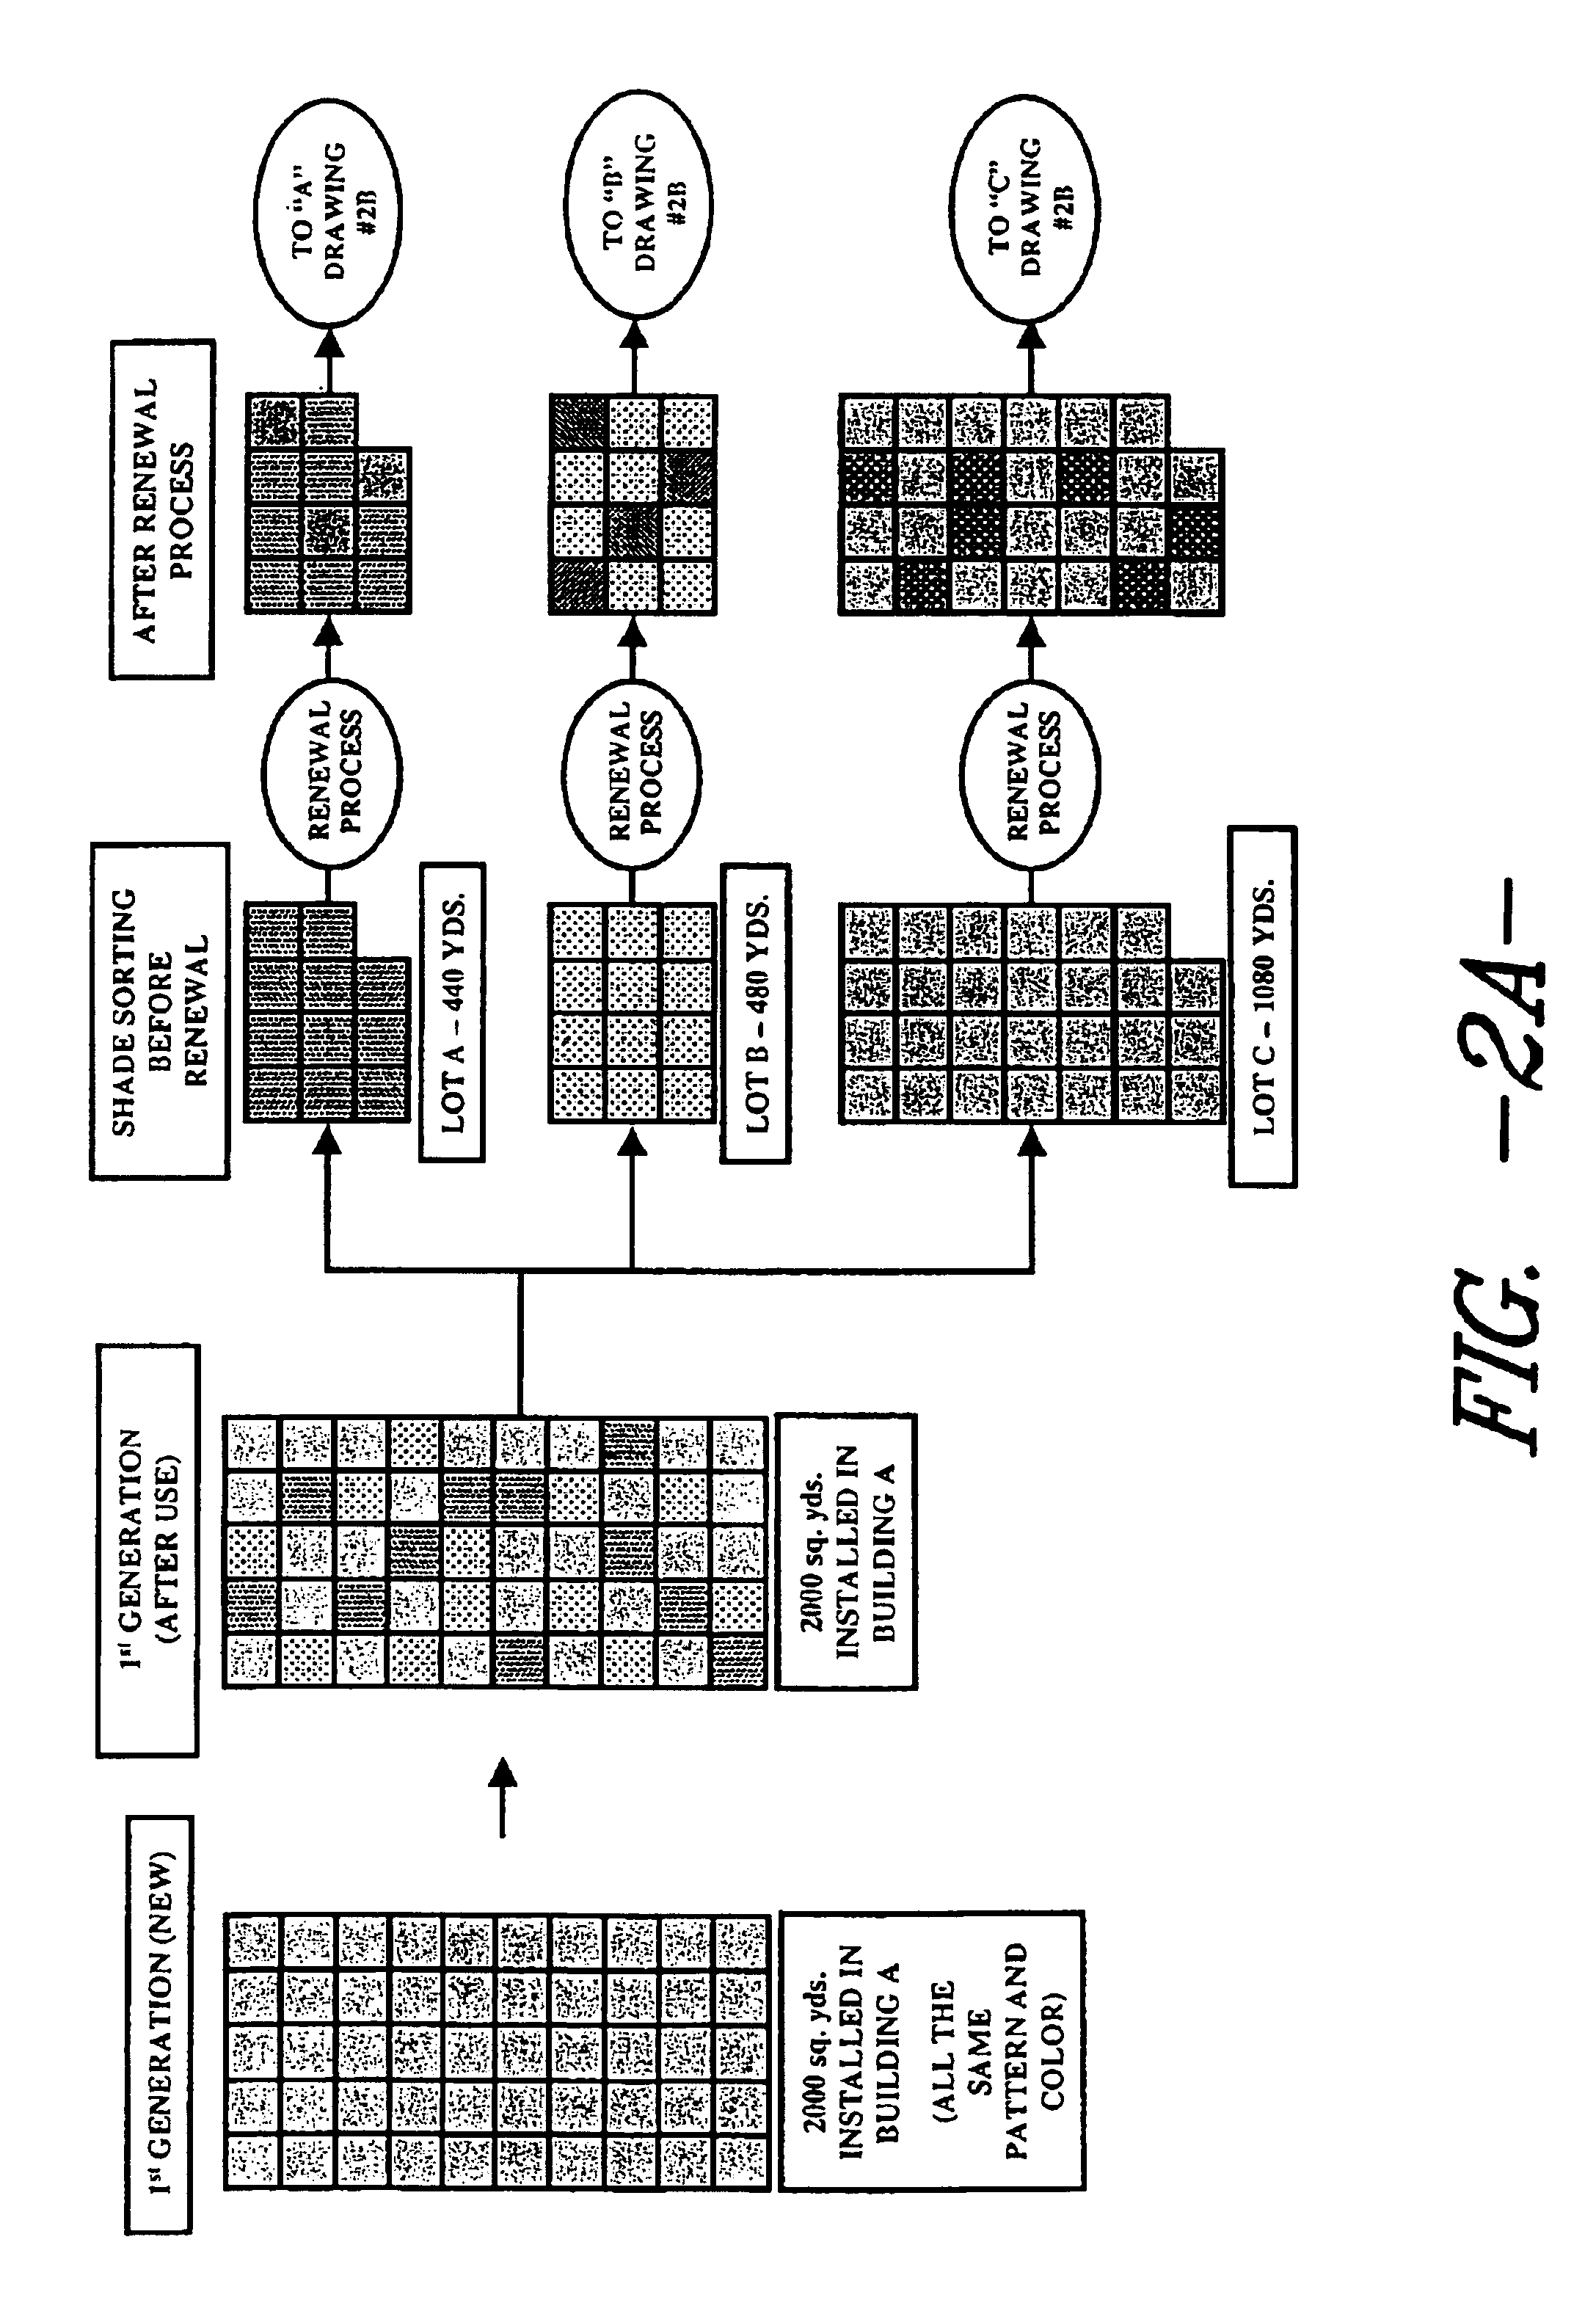 Method of patterning, installing, renewing and/or recycling carpet tiles